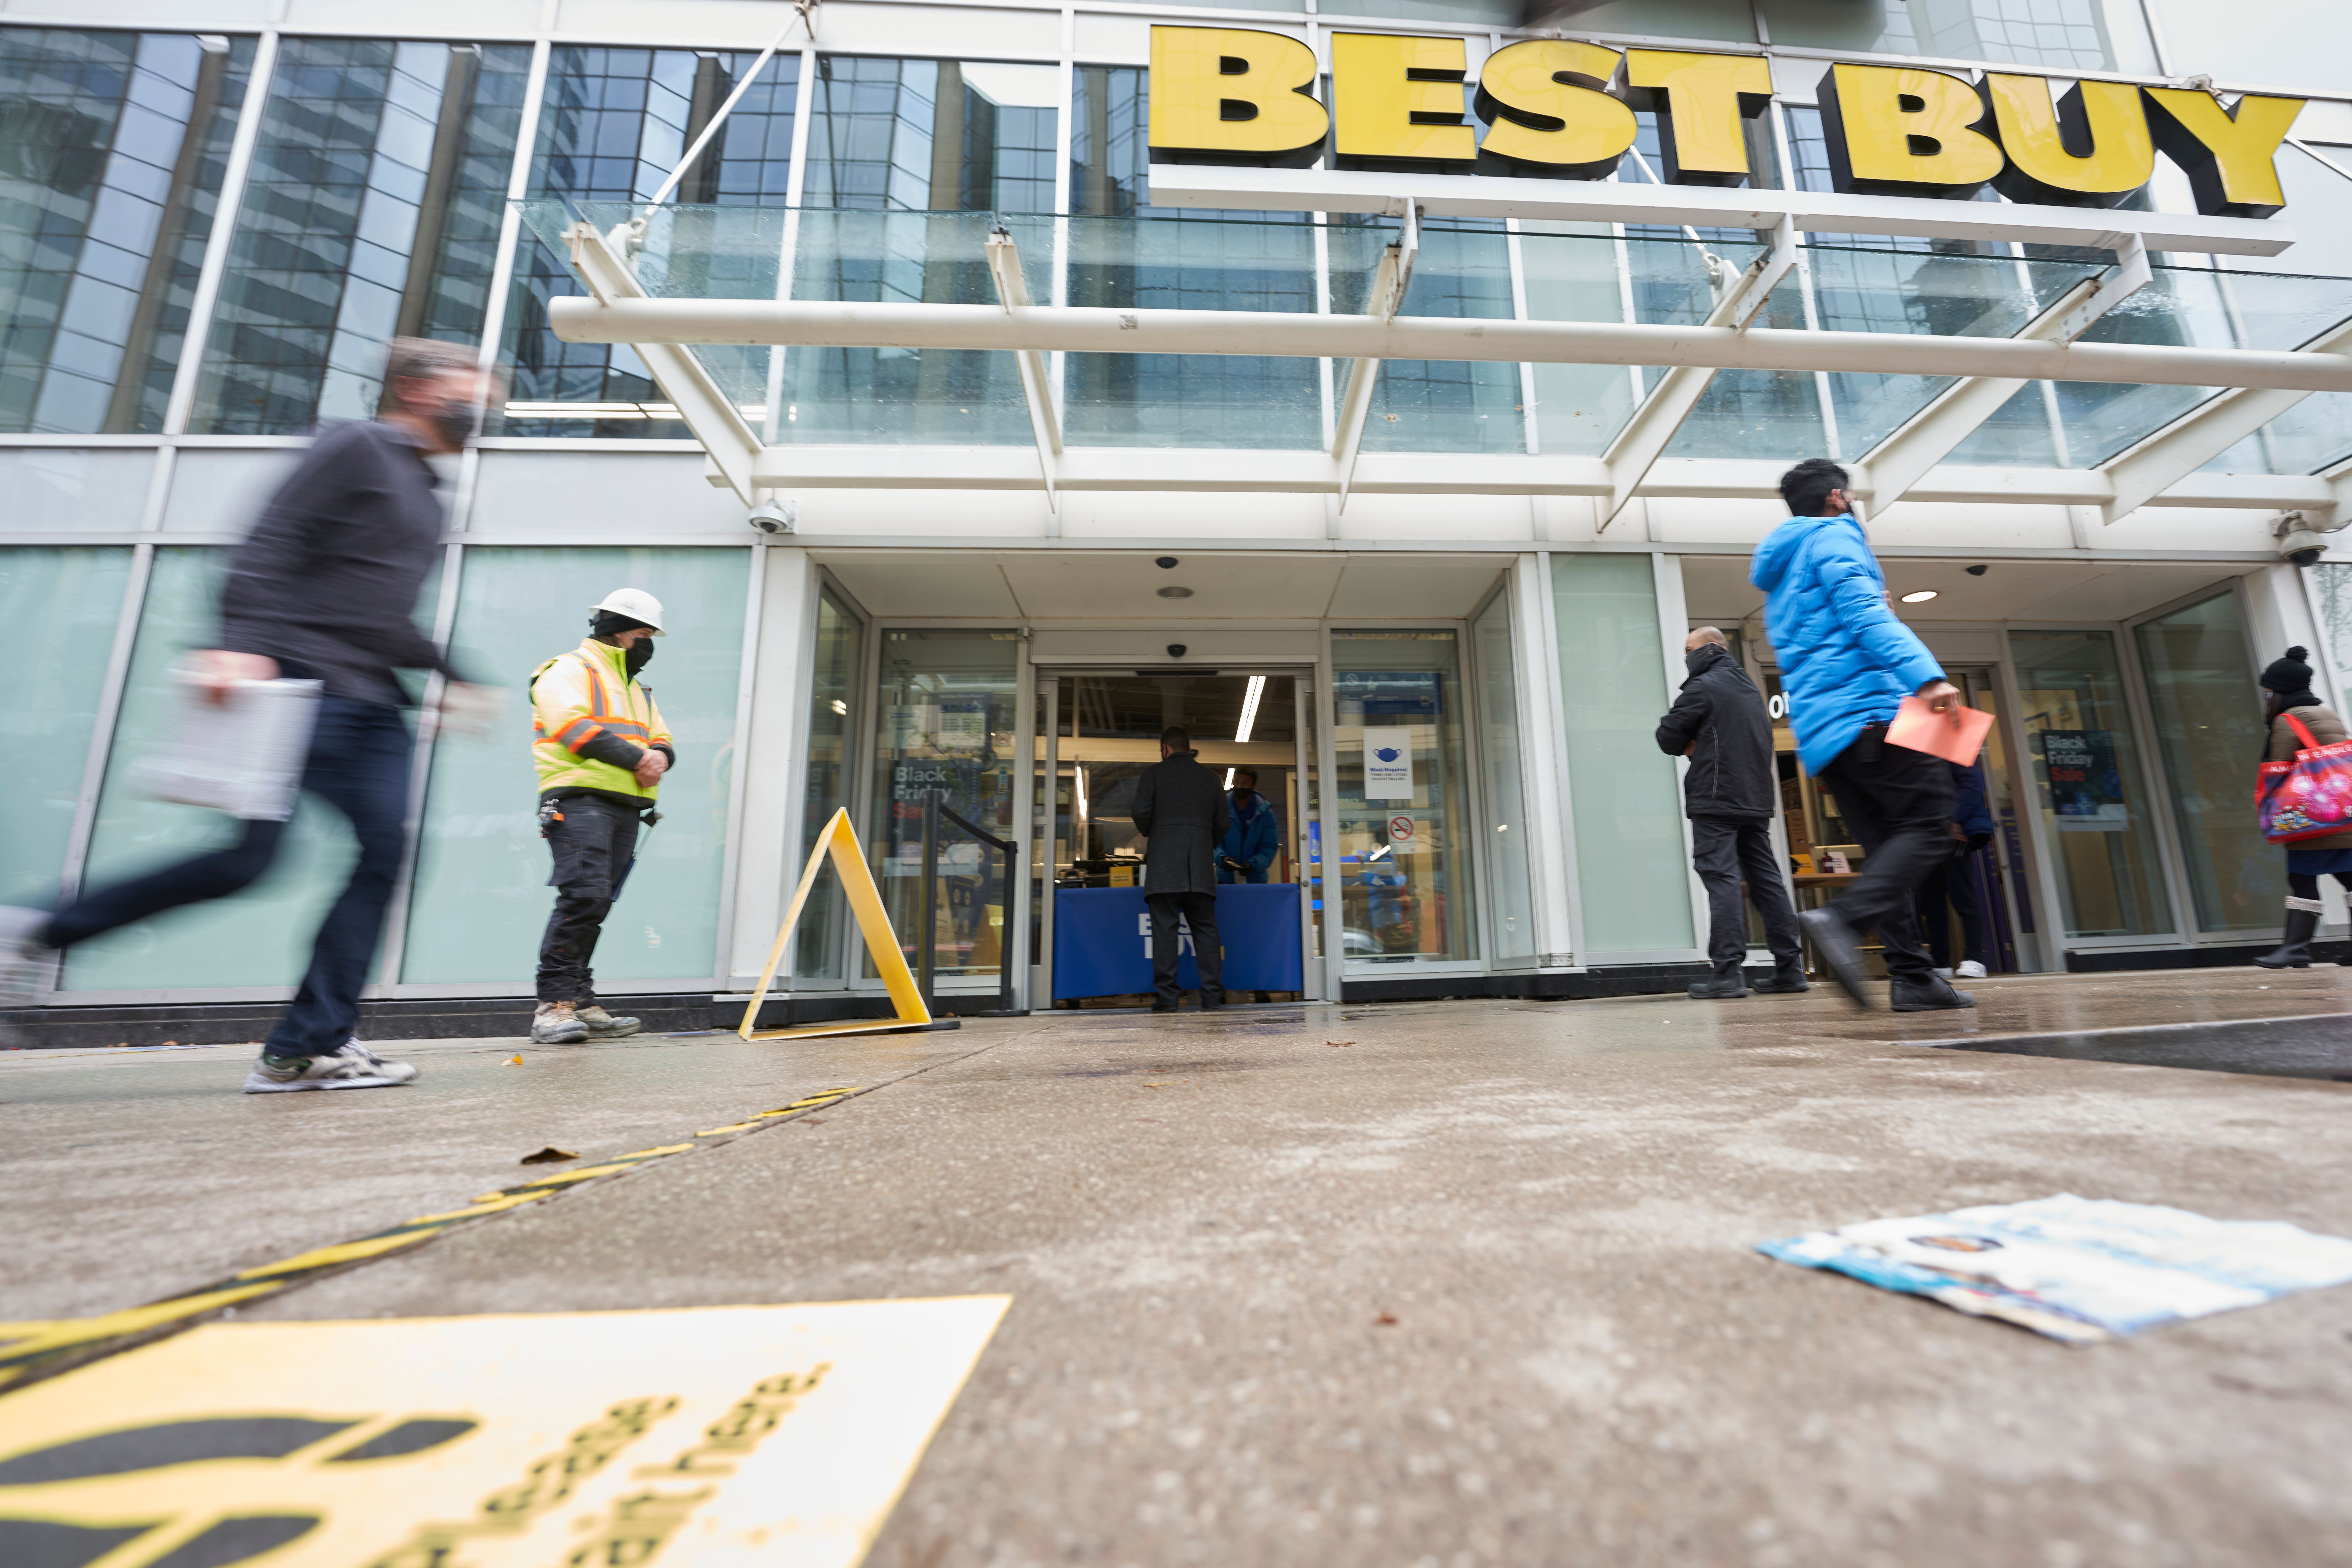 Best Buy (BBY) earnings in the fourth quarter of 2021 exceed projections, but sales gains are slow